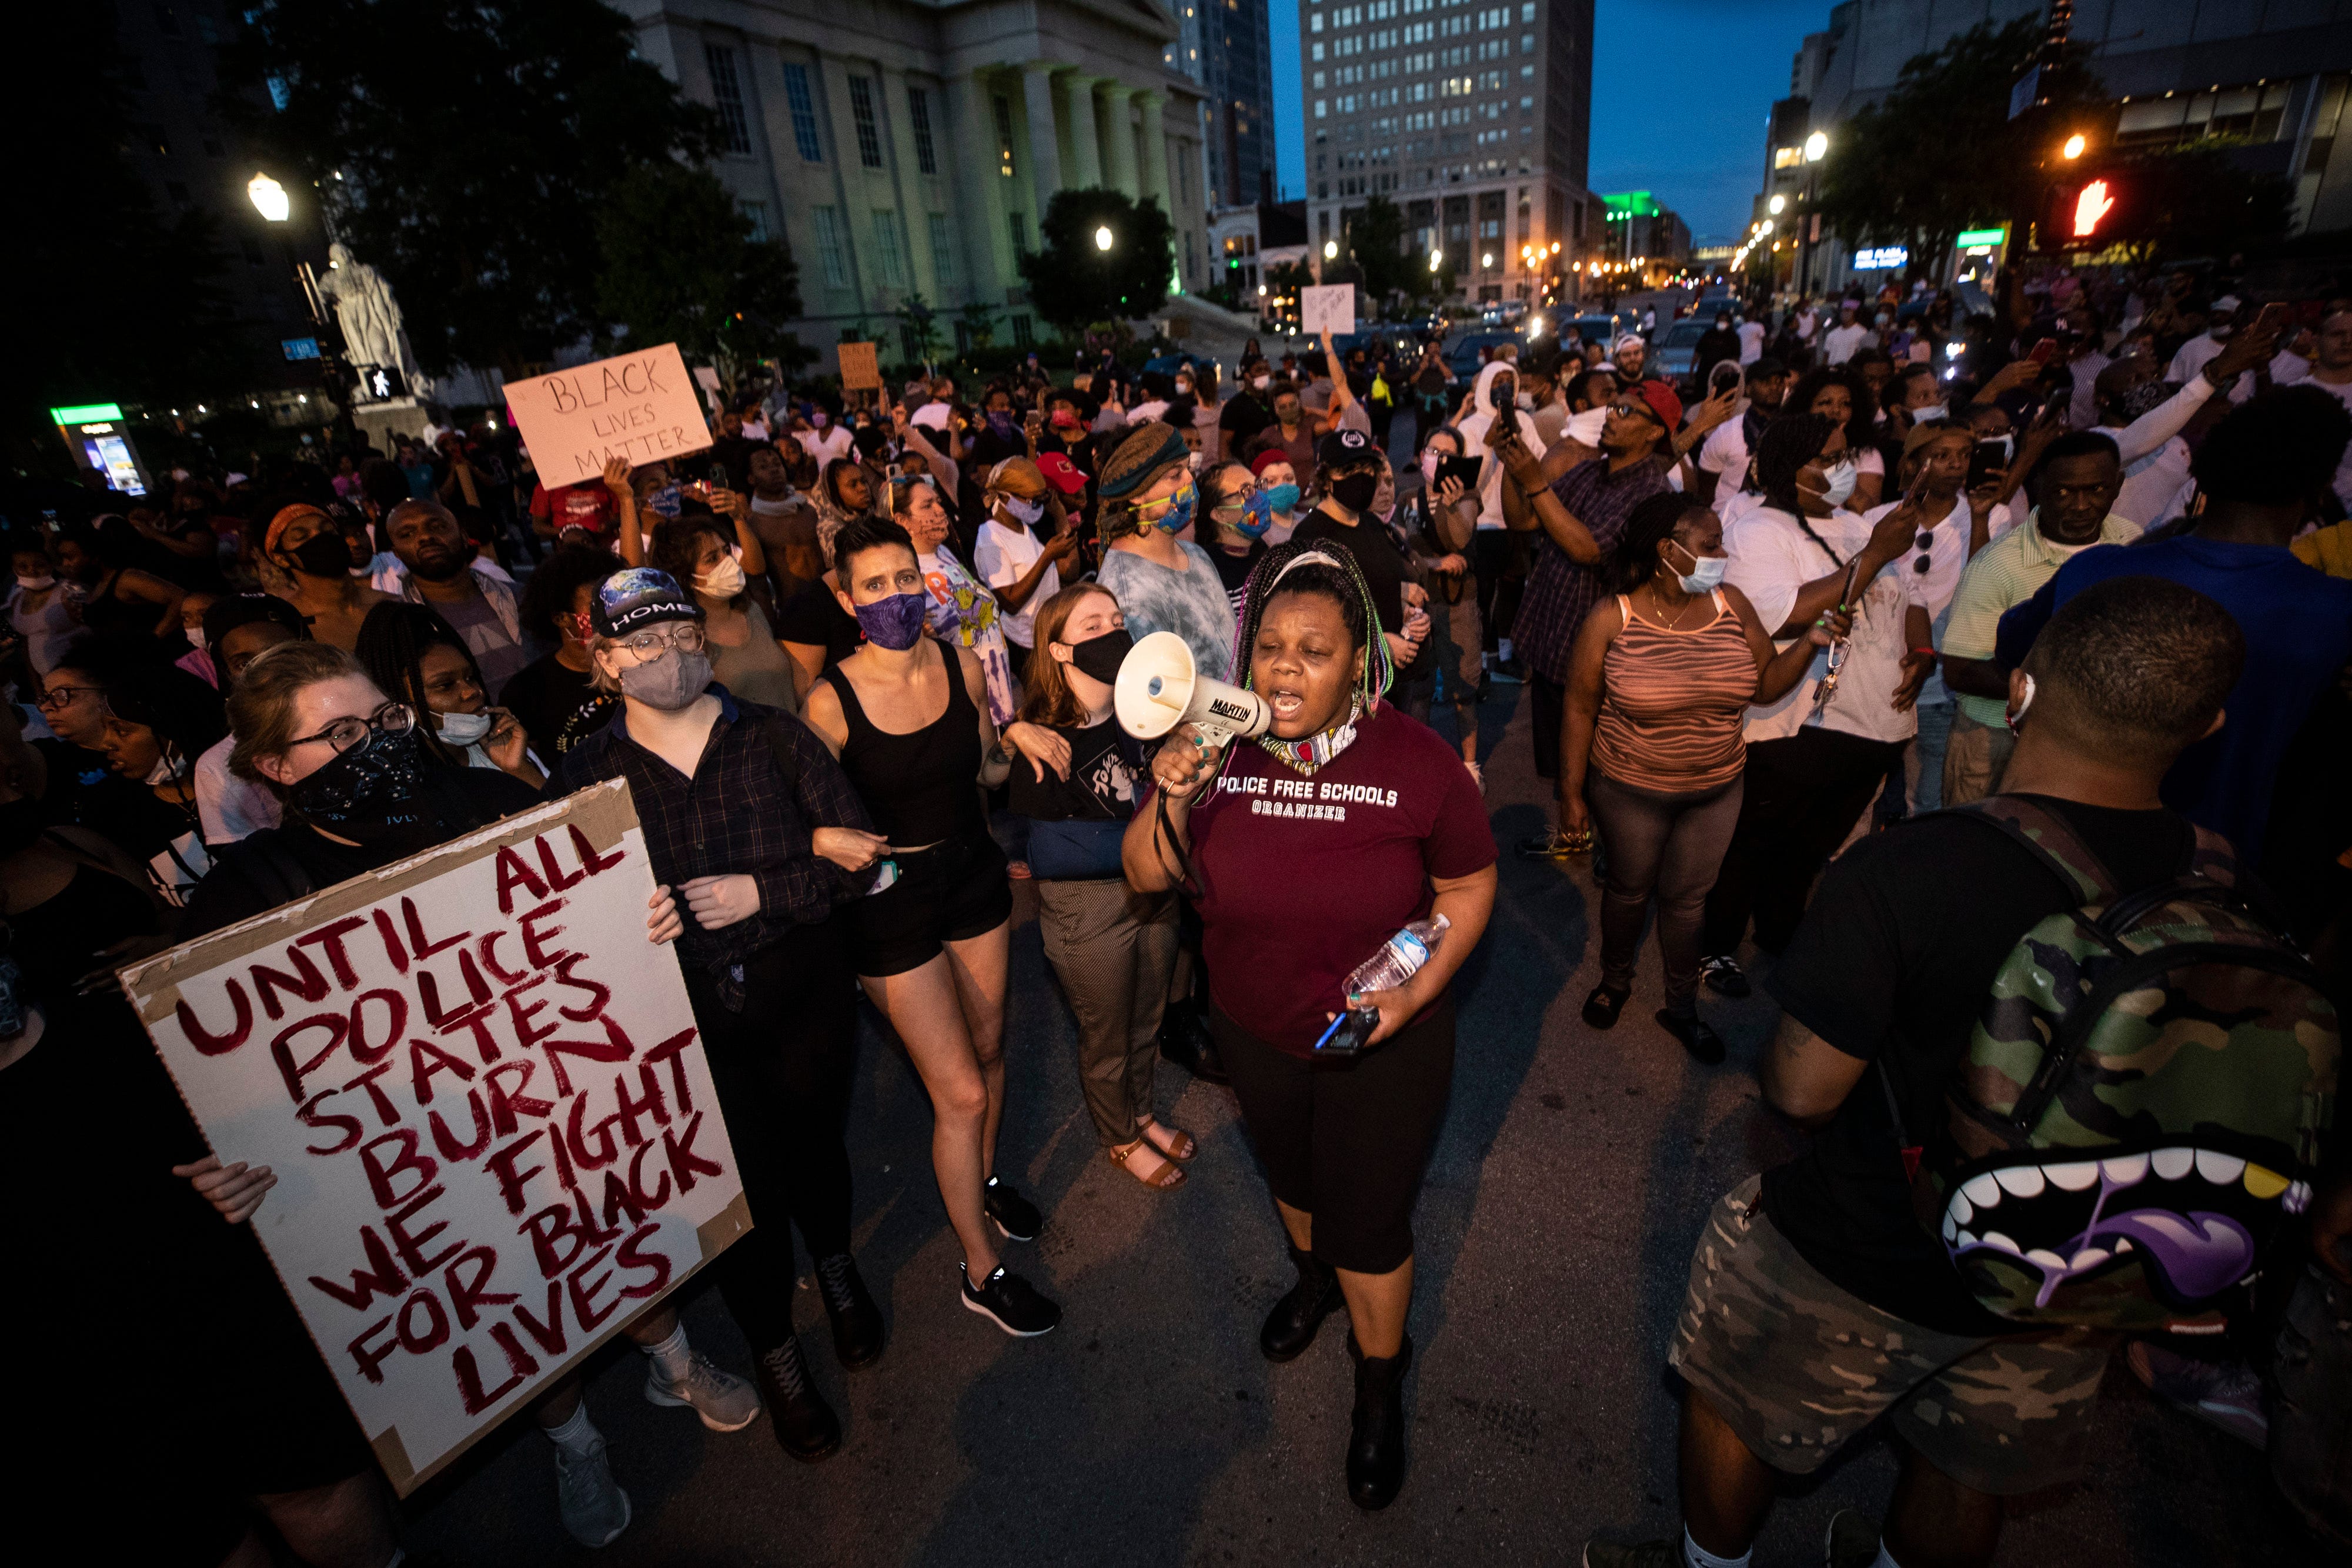 Scenes from a protest in downtown Louisville, Ky. over the shooting of Breonna Taylor by Louisville police. Organizers rally the crowd in the intersection of sixth and Jefferson streets. May 28, 2020